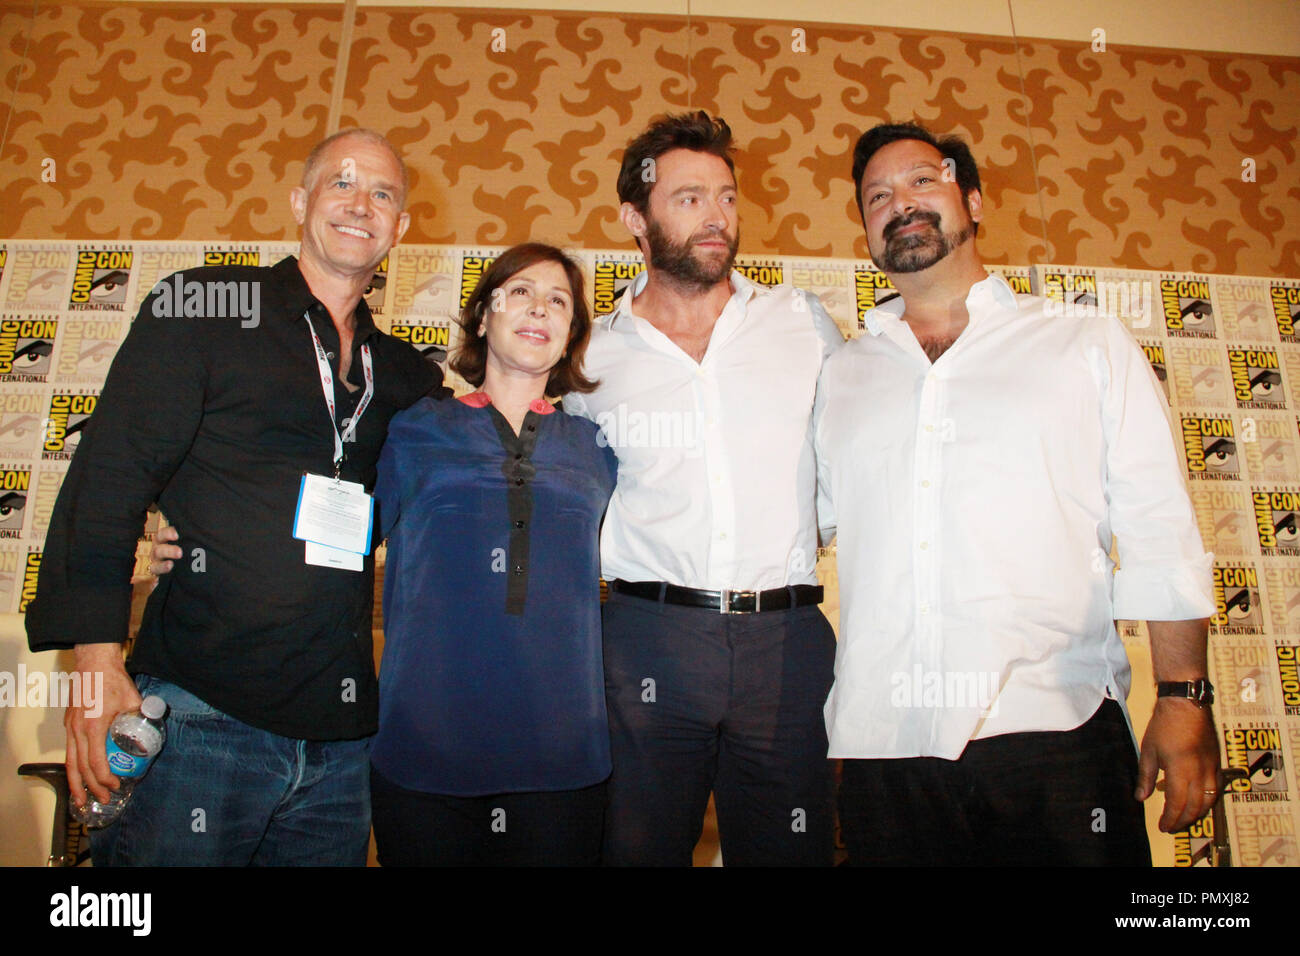 Hutch Parker, Lauren Shuler Donner, Hugh Jackman, James Mangold  07/20/2013 'The Wolverine' Comic-Con Press Conference held at Hilton San Diego Bayfront in San Diego, CA Photo by Izumi Hasegawa / HNW / PictureLux Stock Photo